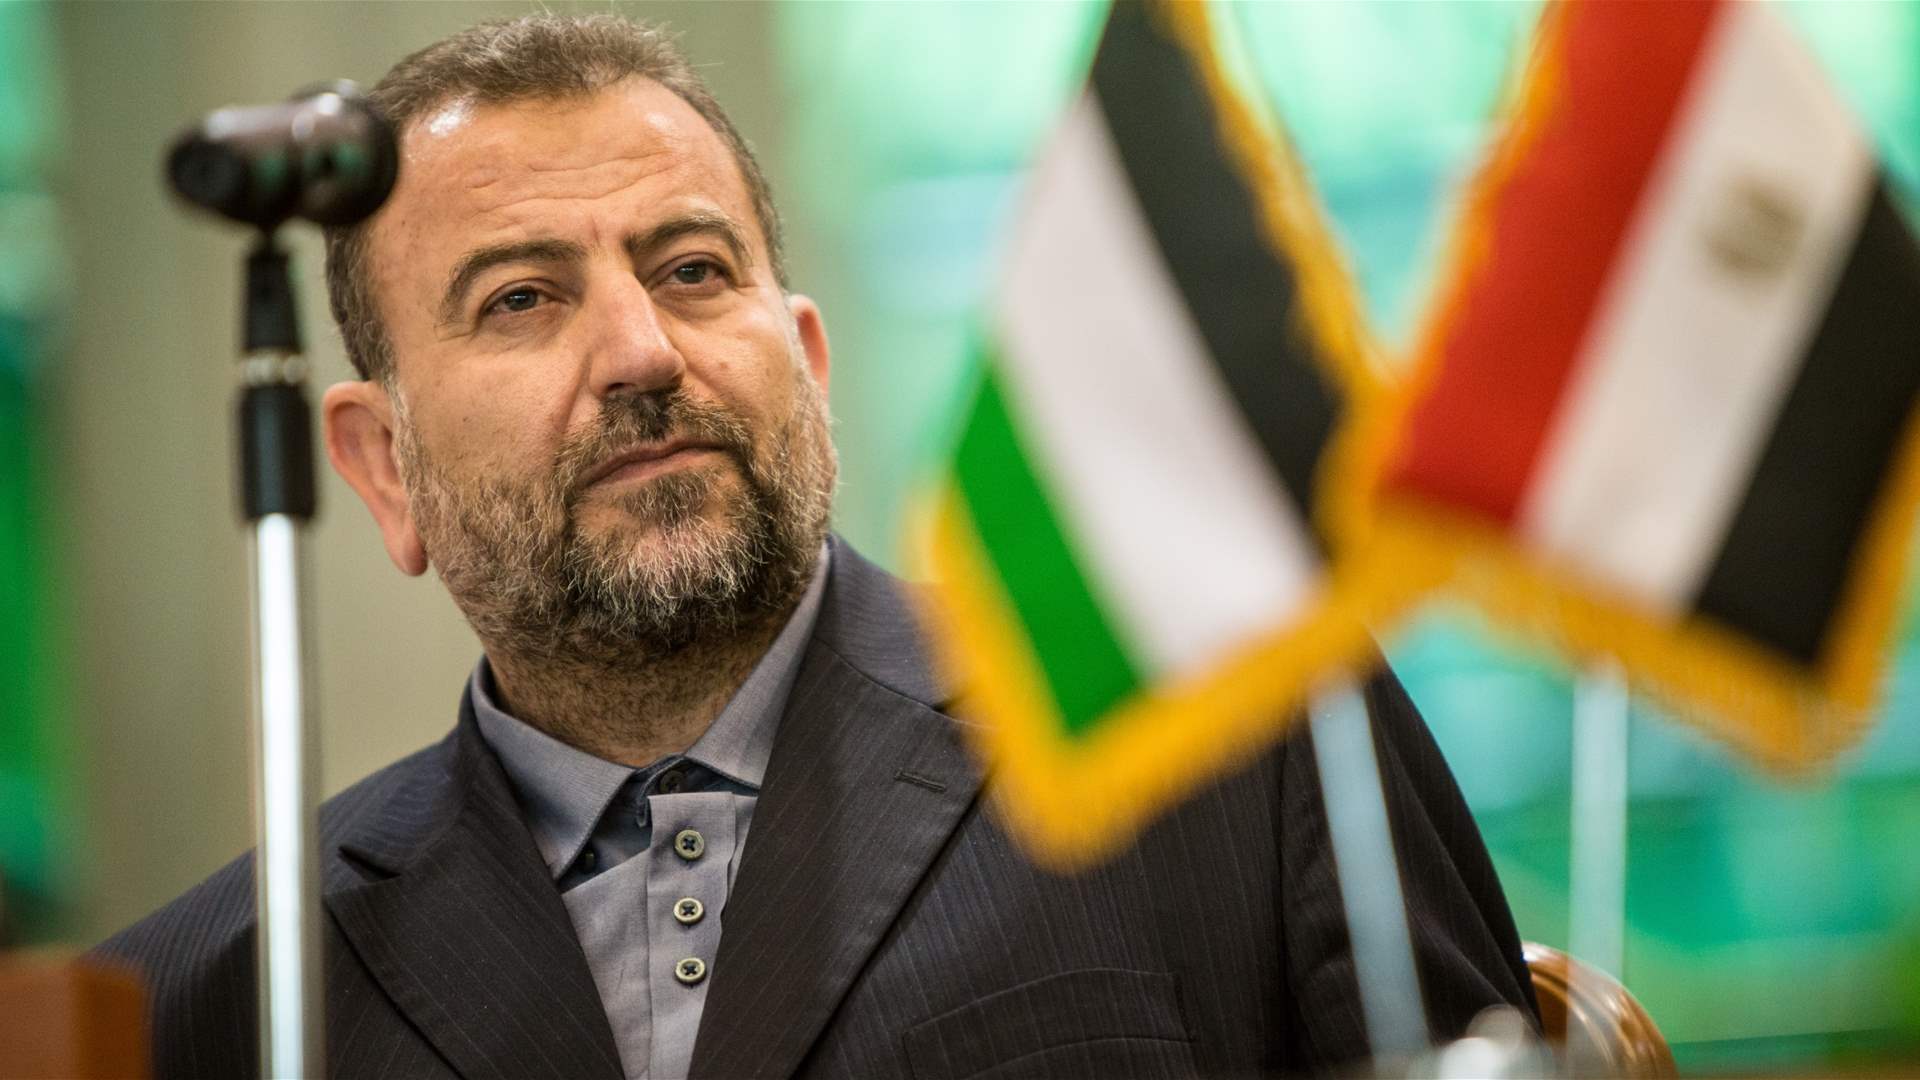 &#39;Defiance amid tragedy&#39;: Hamas vows to continue resistance following Al-Arouri&#39;s assassination